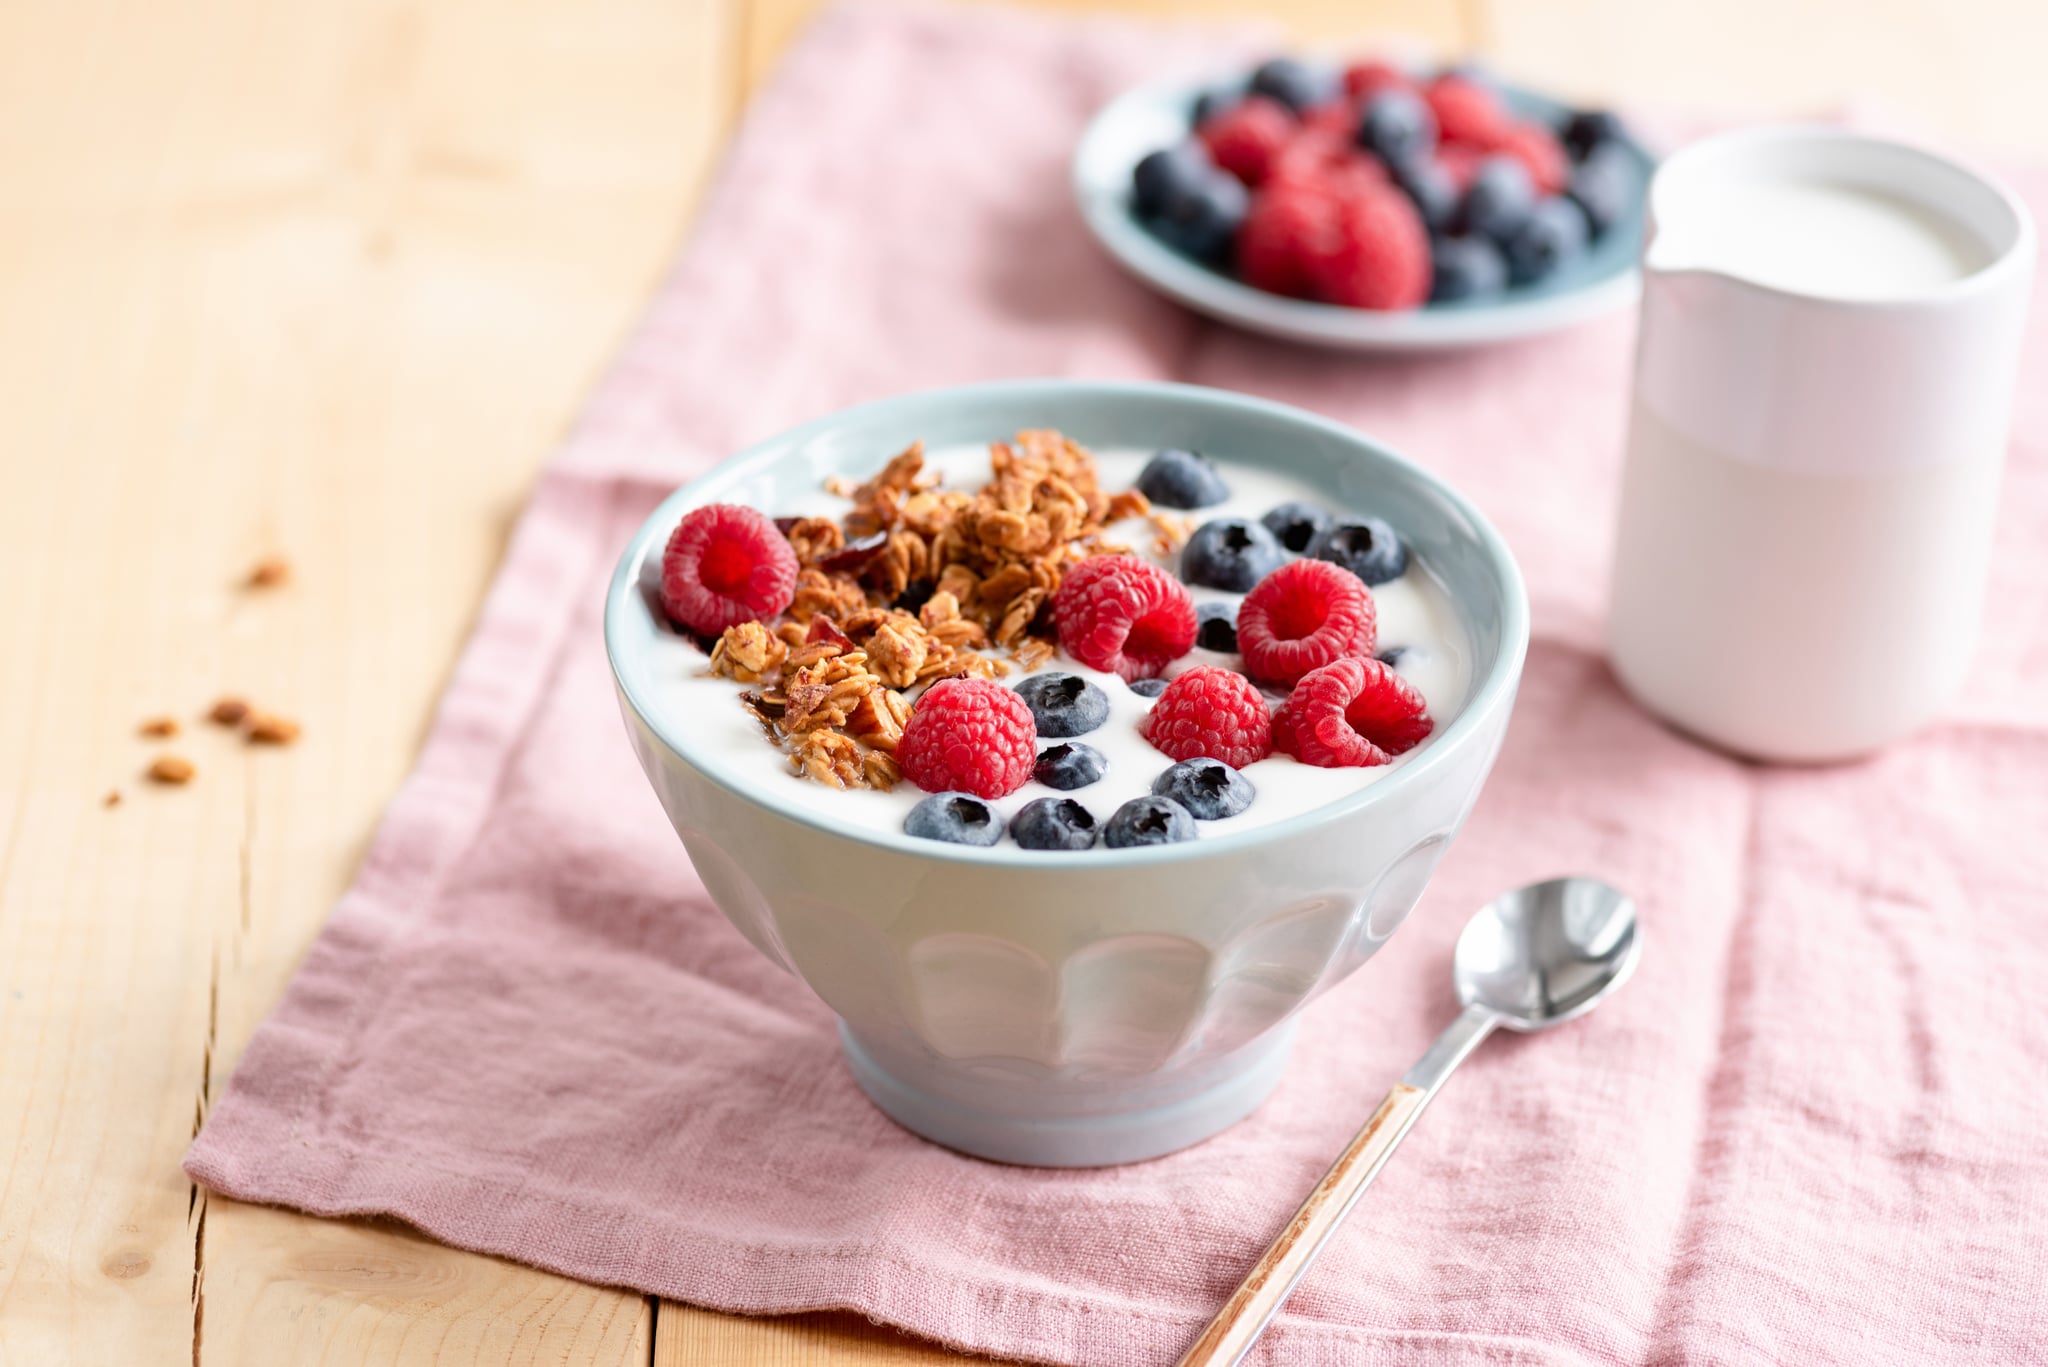 Yogurt with granola and berries in bowl on wooden table. Healthy eating, dieting, weight loss concept